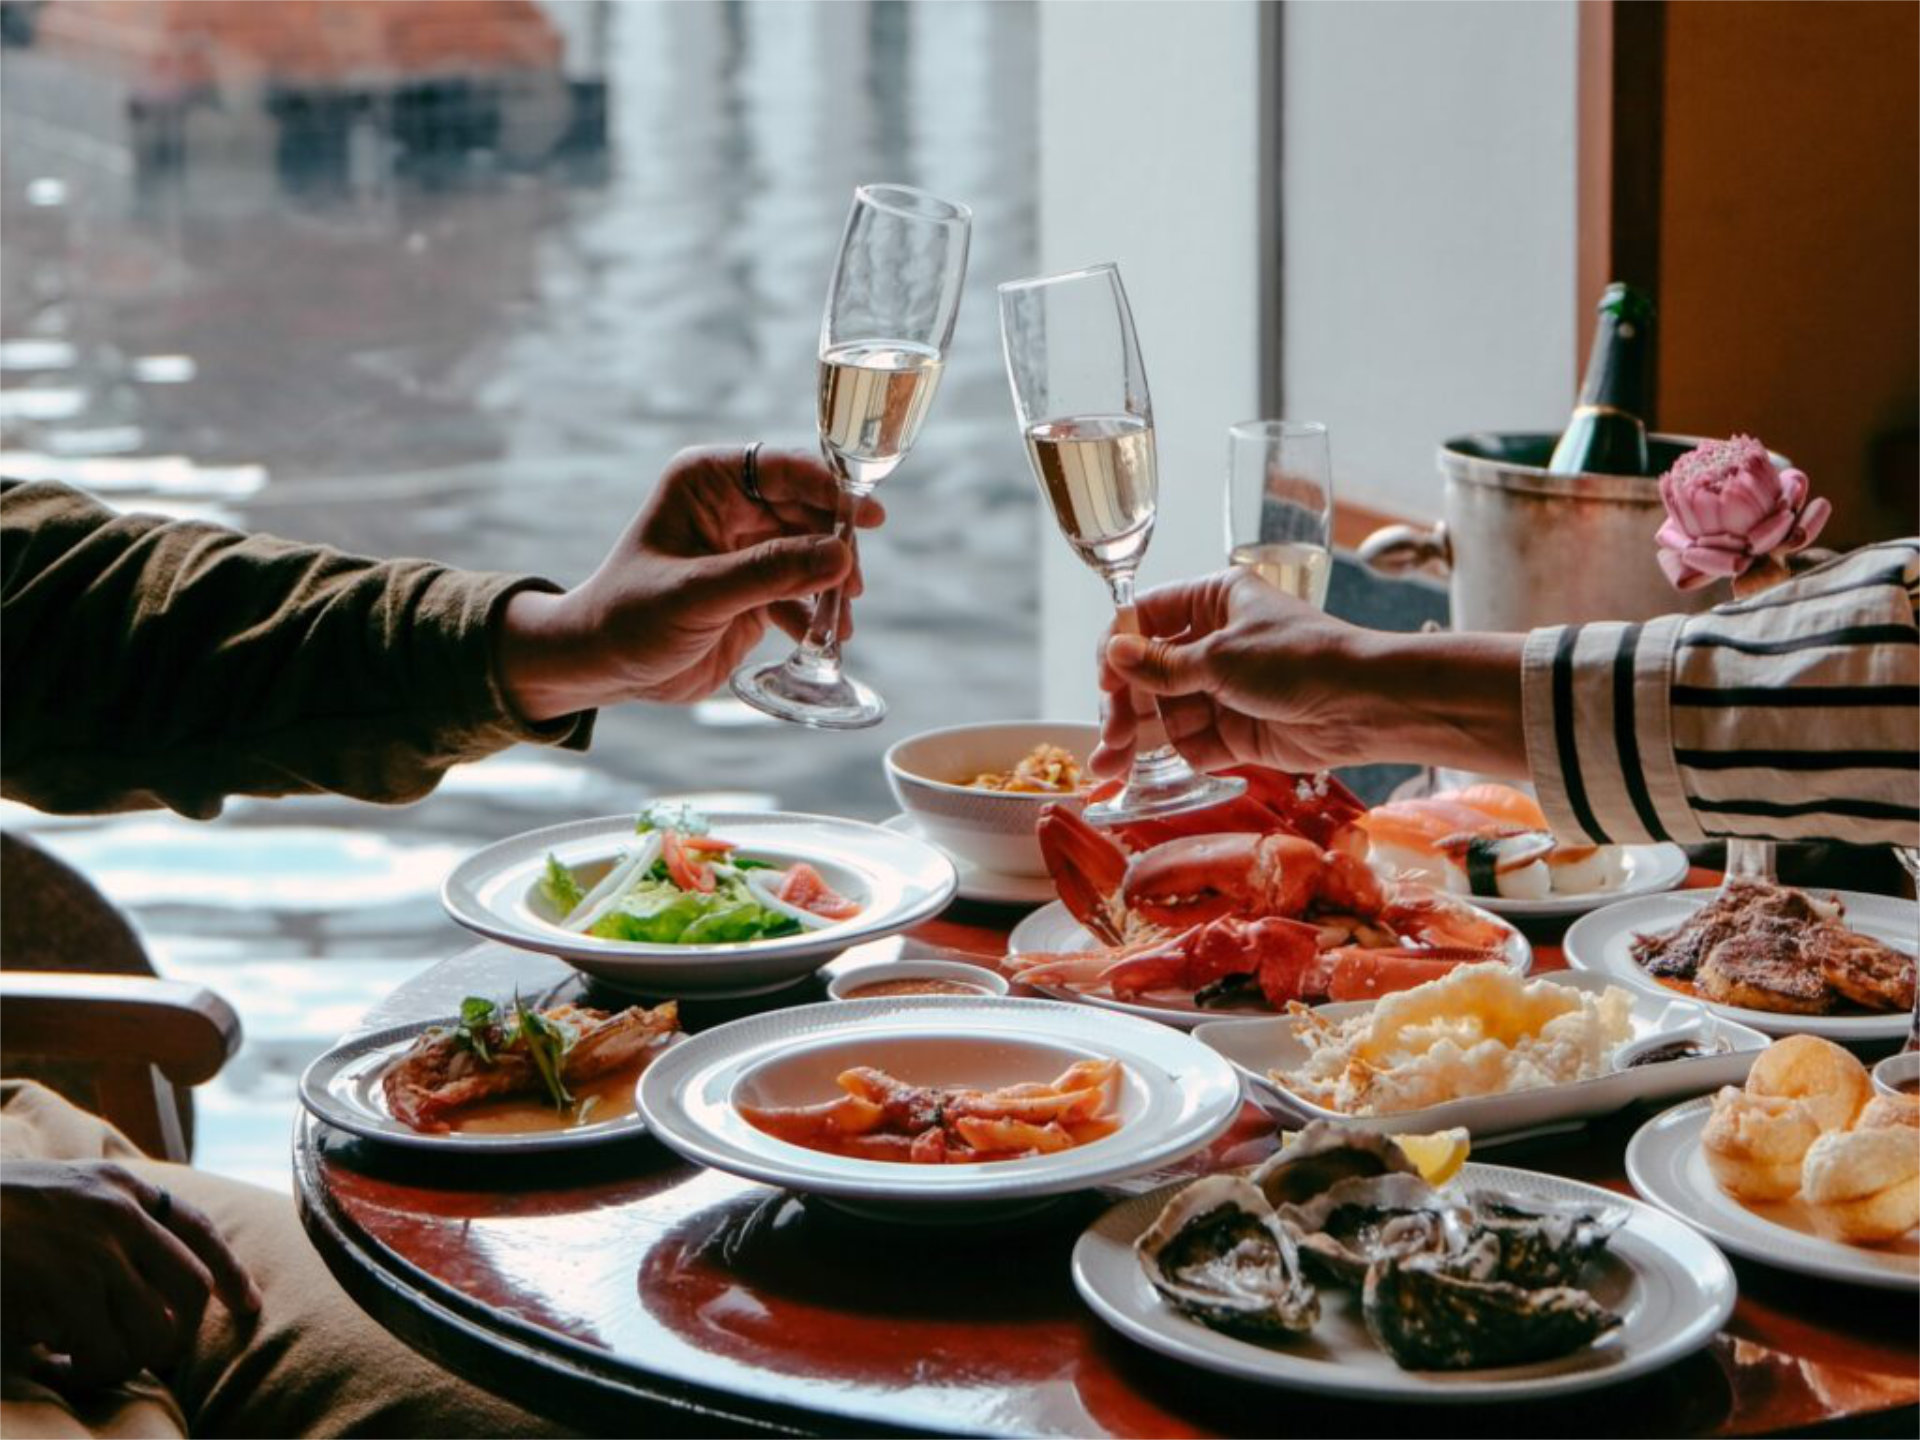 Sunday brunch at The Sukhothai Bangkok is one of the city's most lavish spreads of crab, clams, oysters and other culinary delights - Luxury Escapes